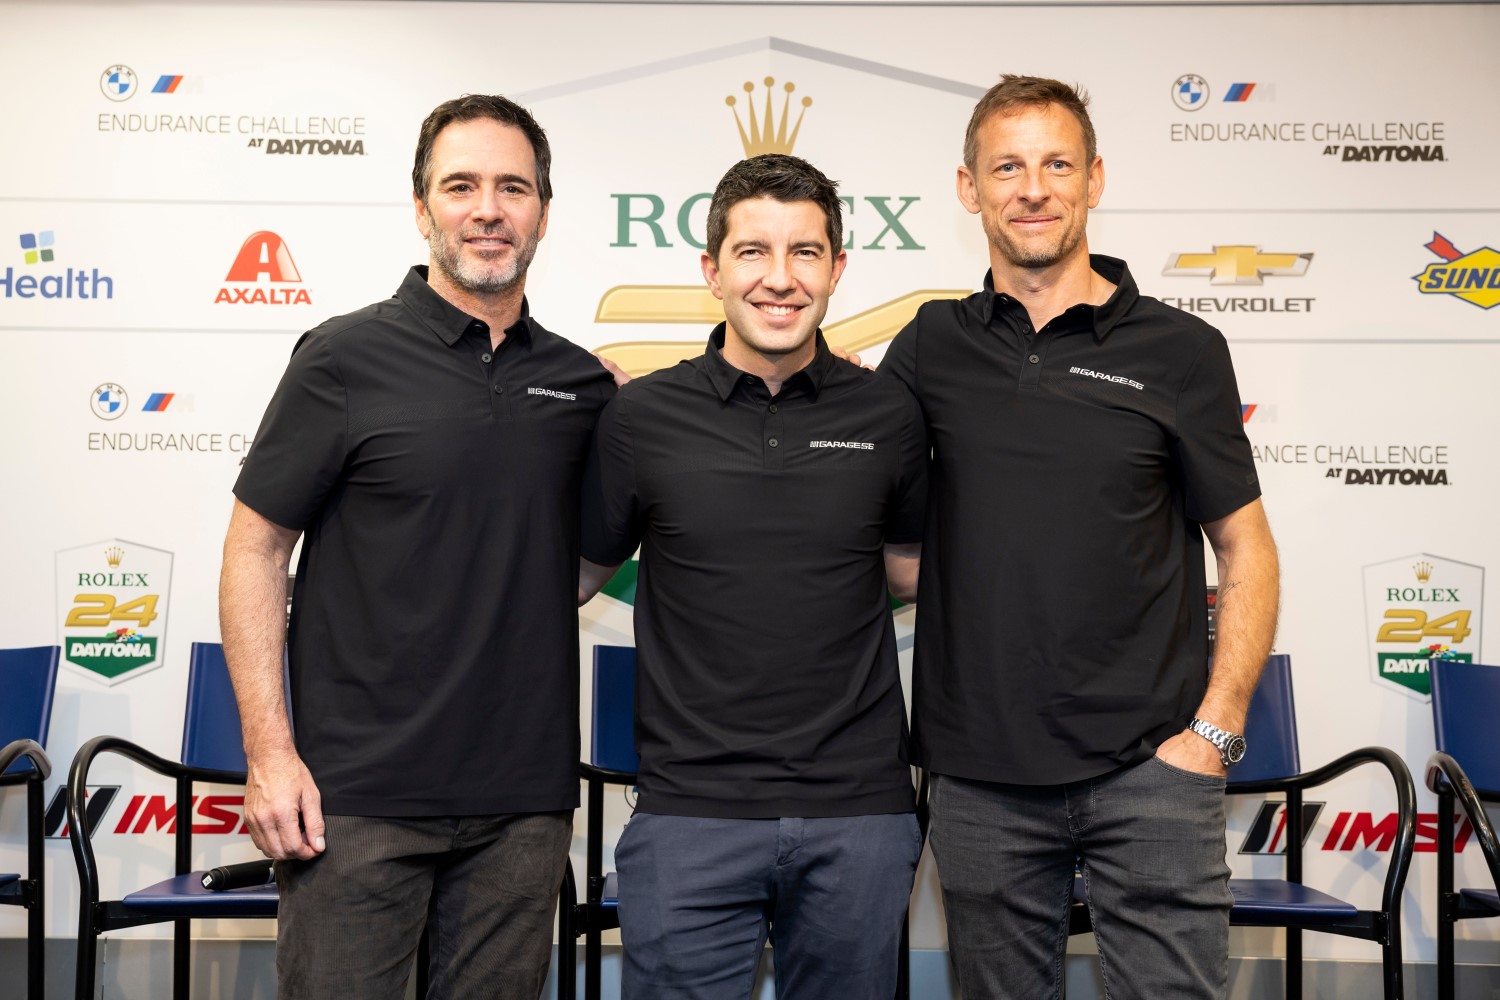 Drivers Jimmie Johnson, Mike Rockenfeller, and Jenson Button pose for a photo after a press conference announcing the NASCAR Garage 56 driver lineup for entry in 2023 Le Mans before the Rolex 24 at Daytona International Speedway on January 28, 2023 in Daytona Beach, Florida. (Photo by James Gilbert/Getty Images)